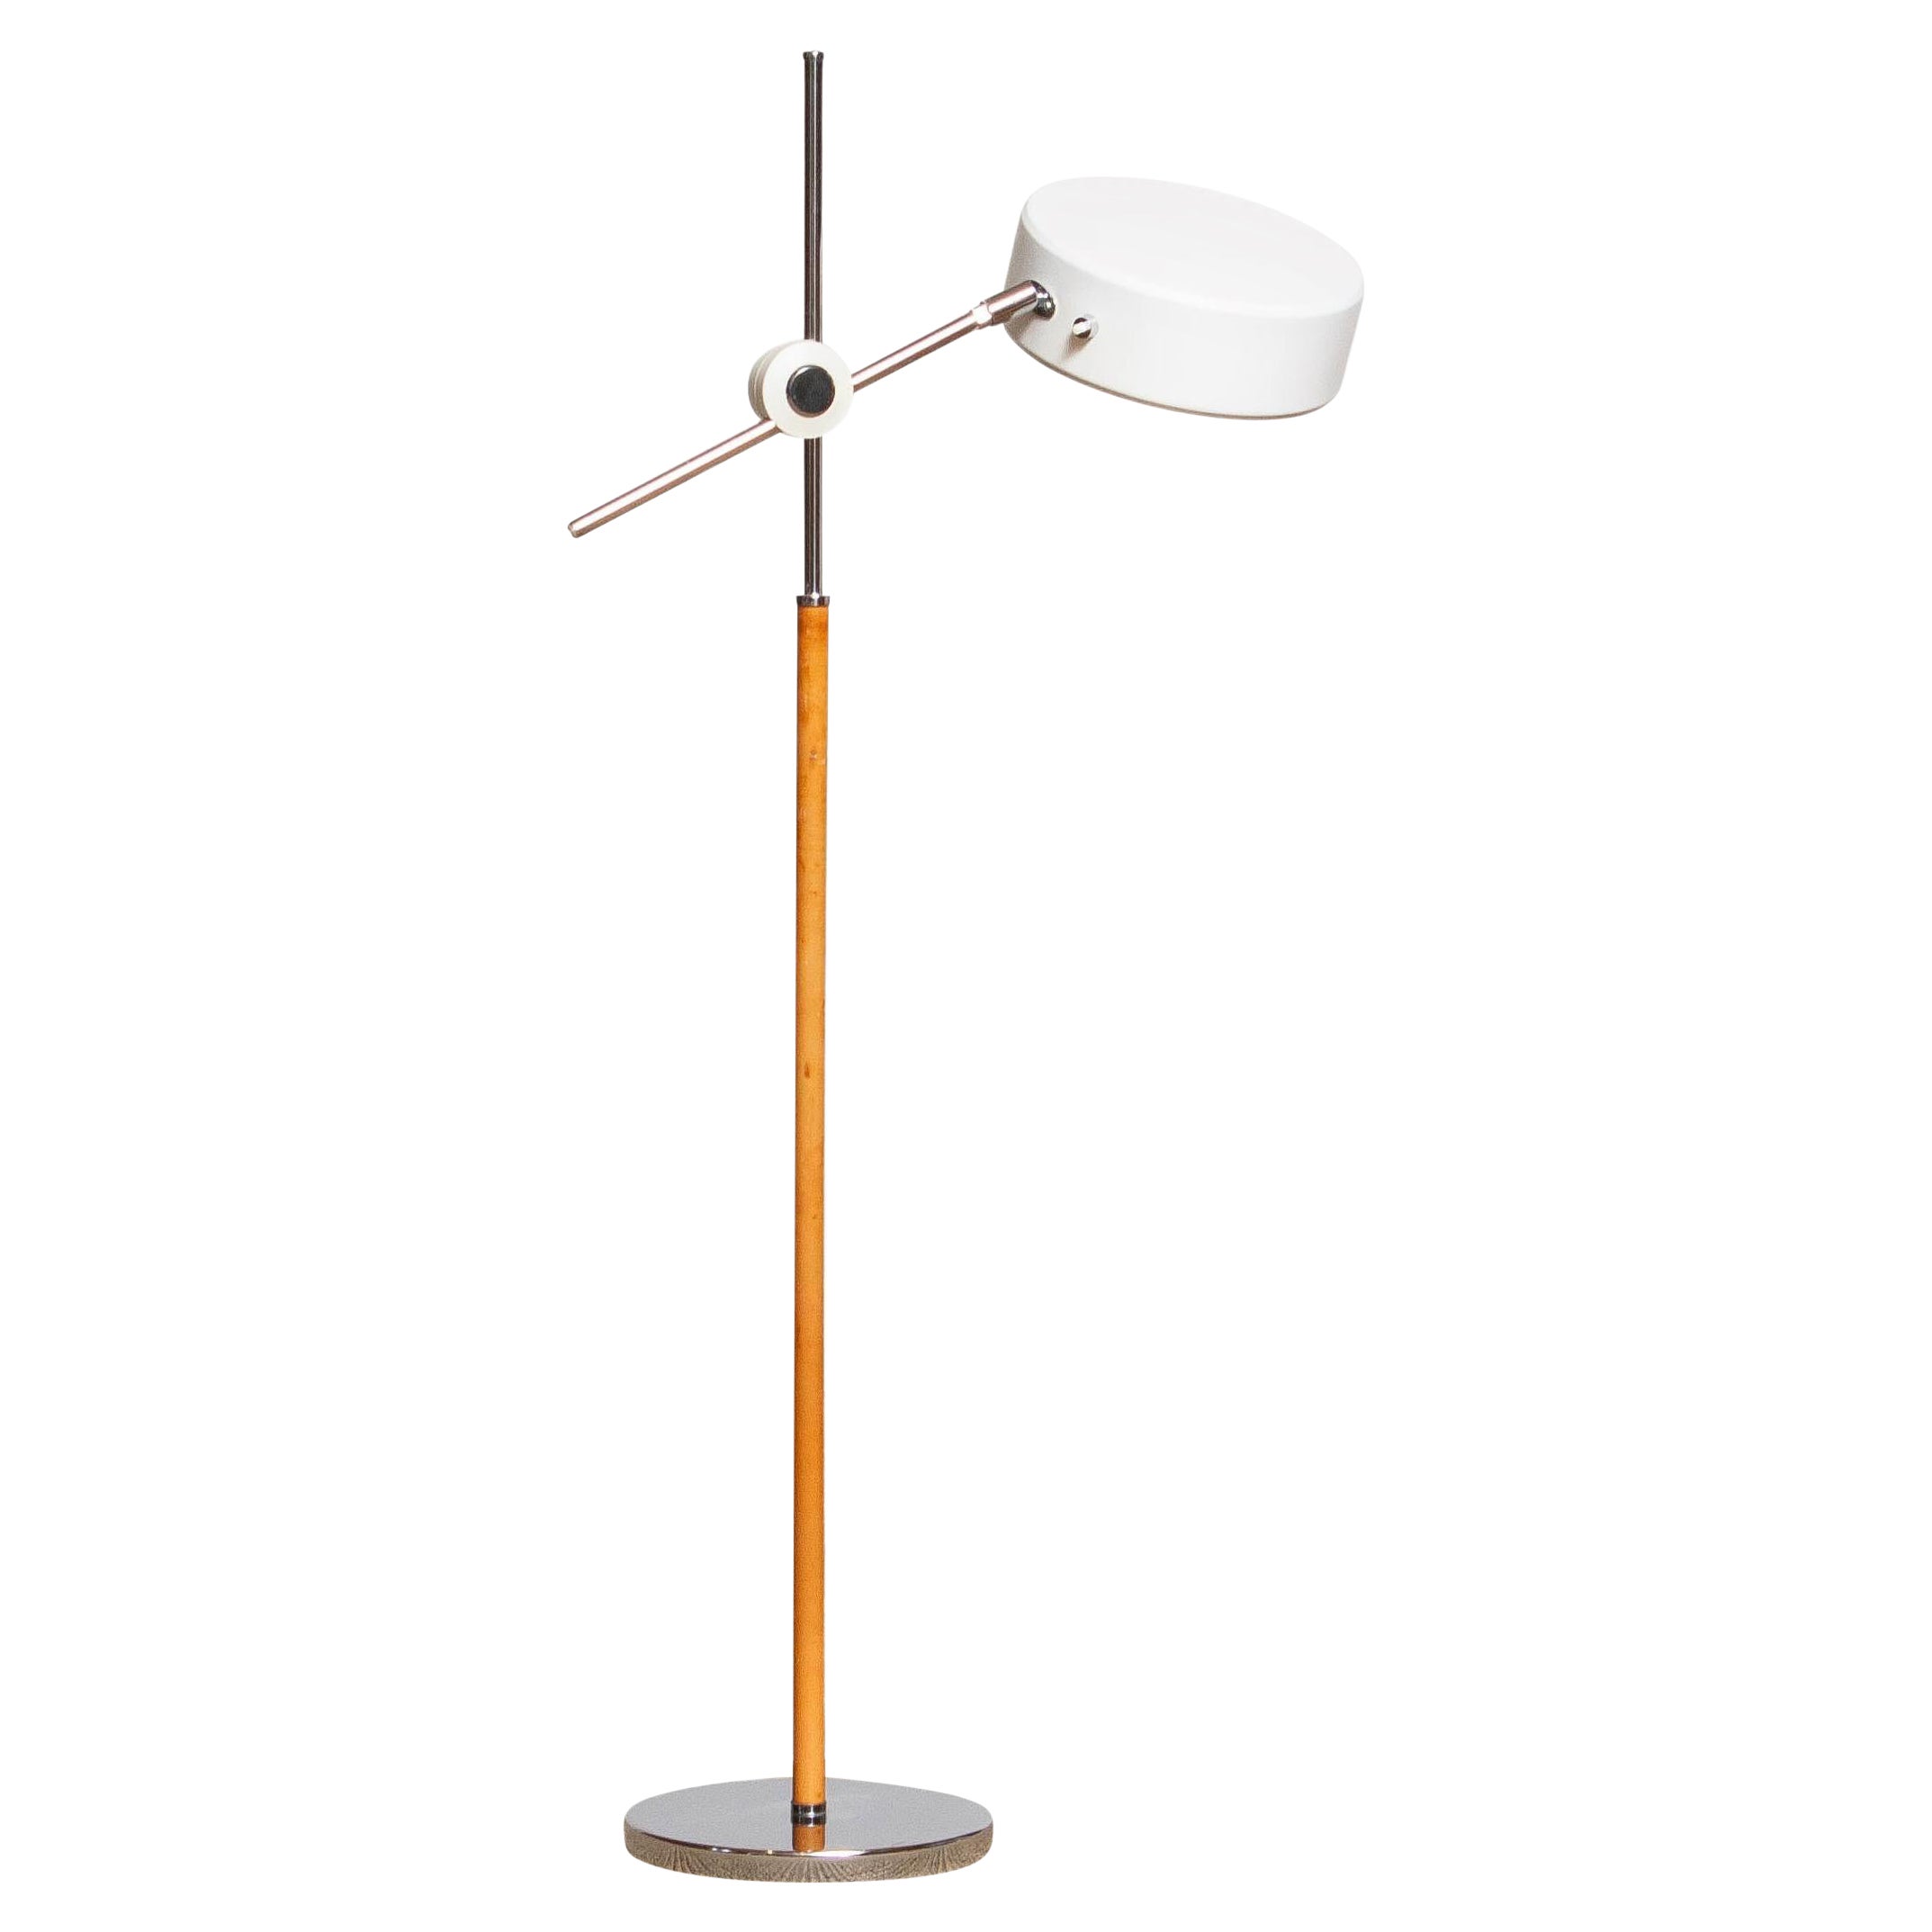 1970s White and Leather Olympic Floor Lamp by Anders Pehrson for Atelje Lyktan